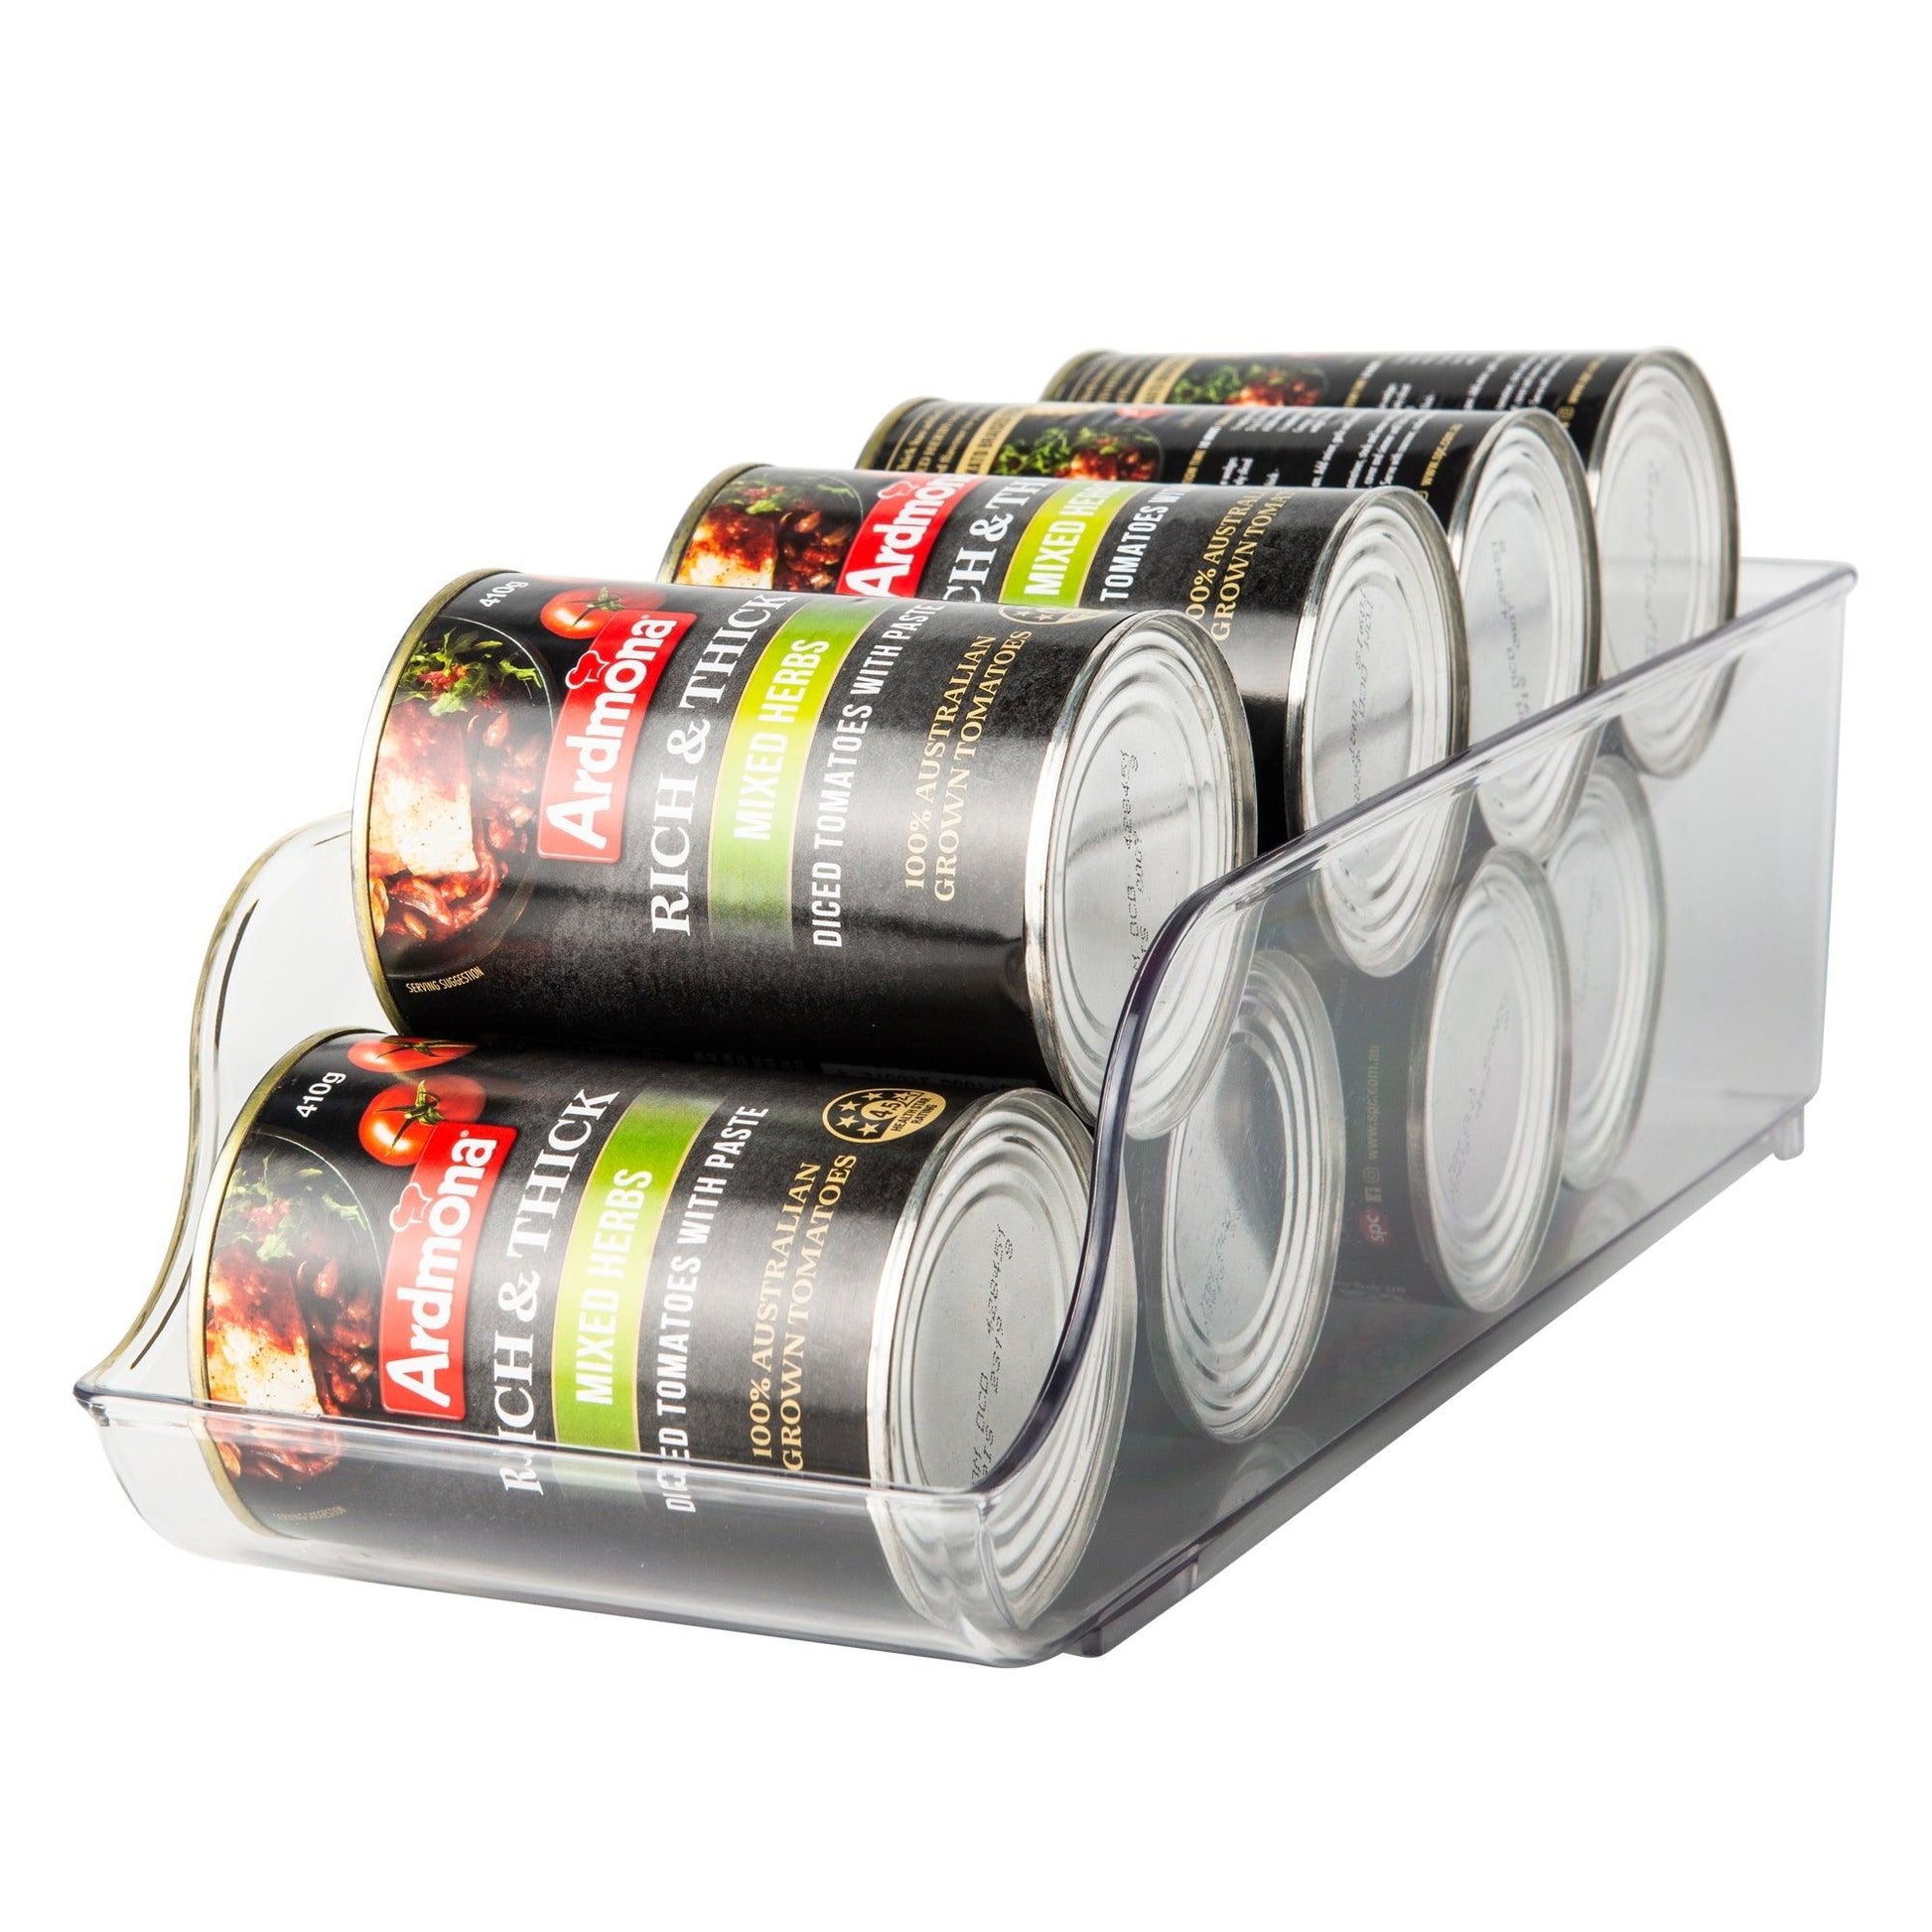 Clear Can Organiser Small - Little Label Co - Kitchen Organizers - 20%, Catchoftheday, PLASTIC